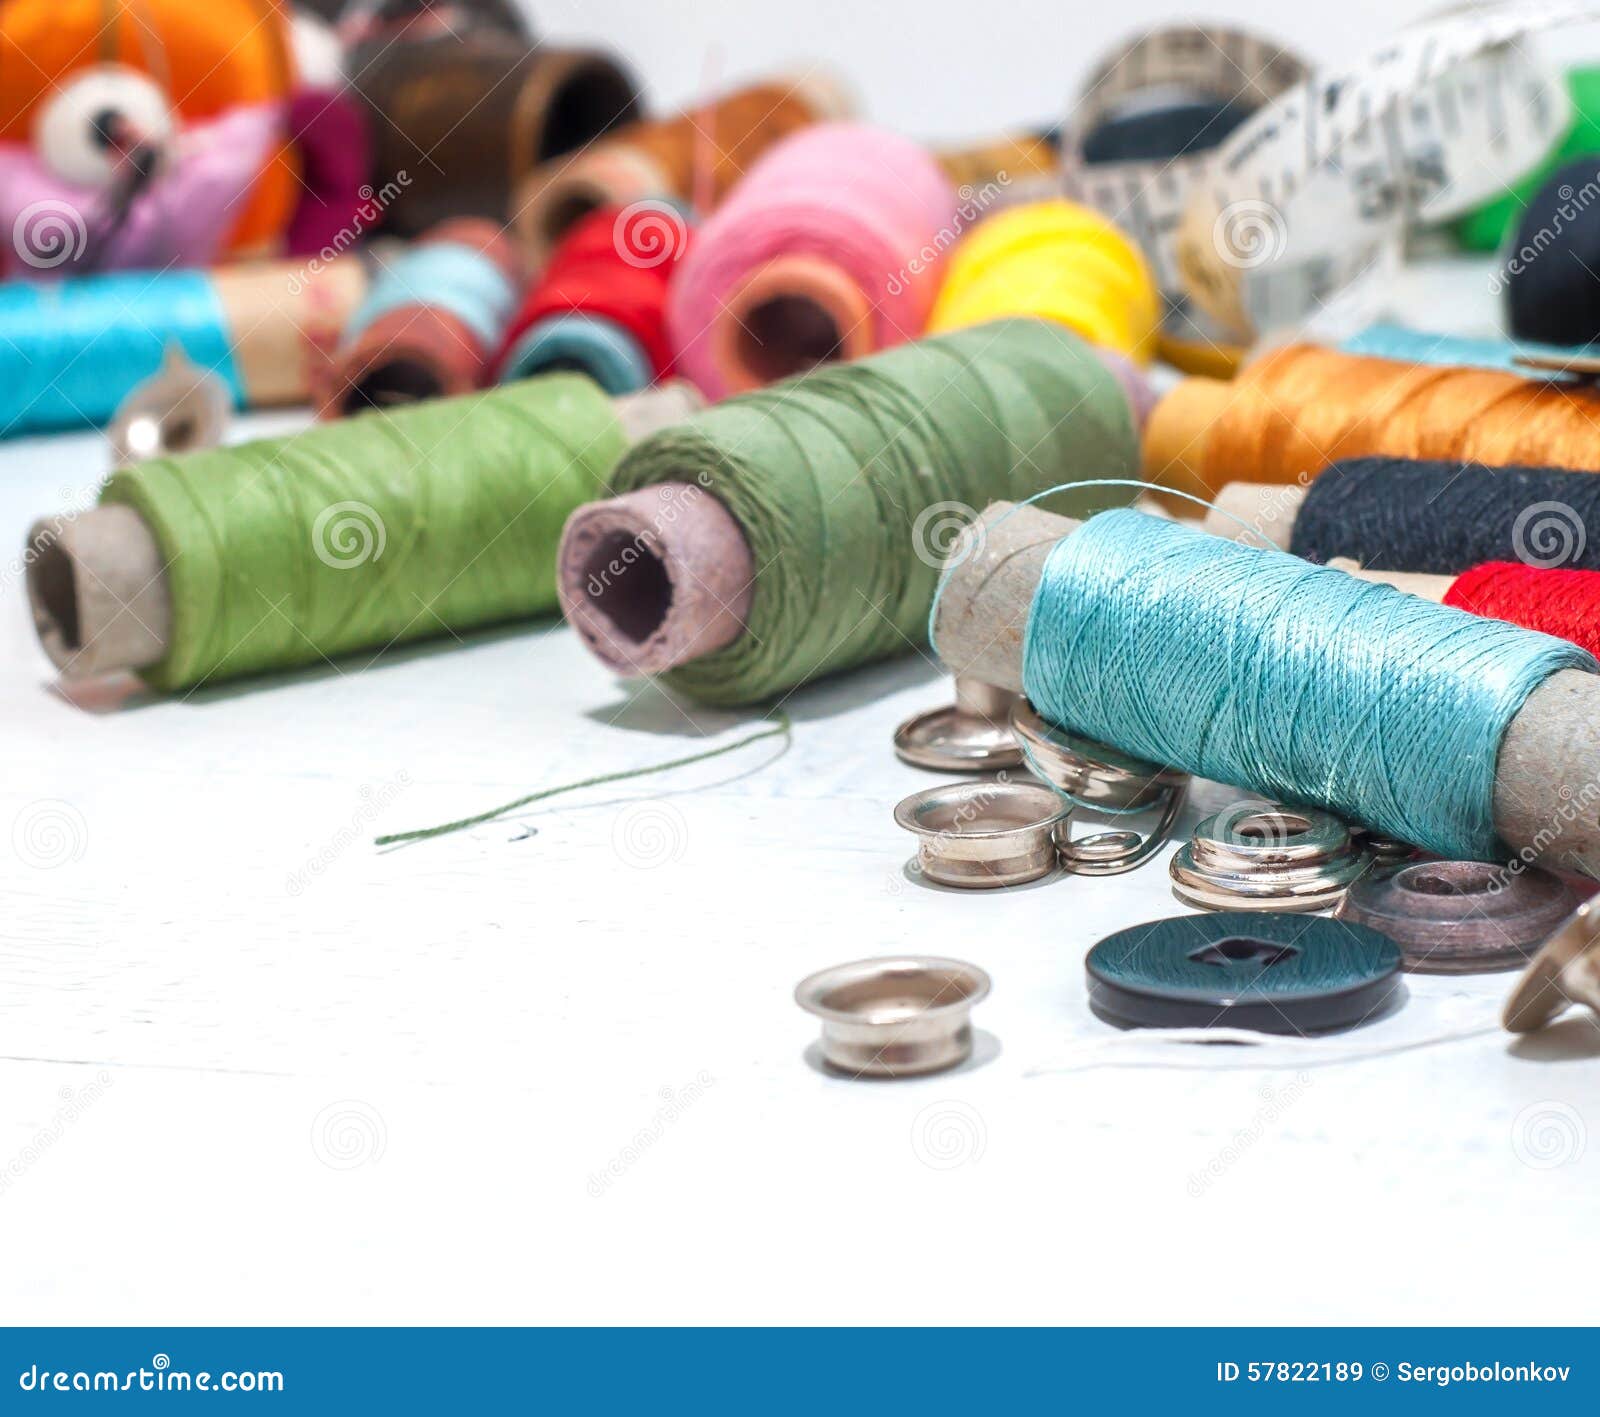 Sewing_background stock image. Image of material, sewing - 57822189